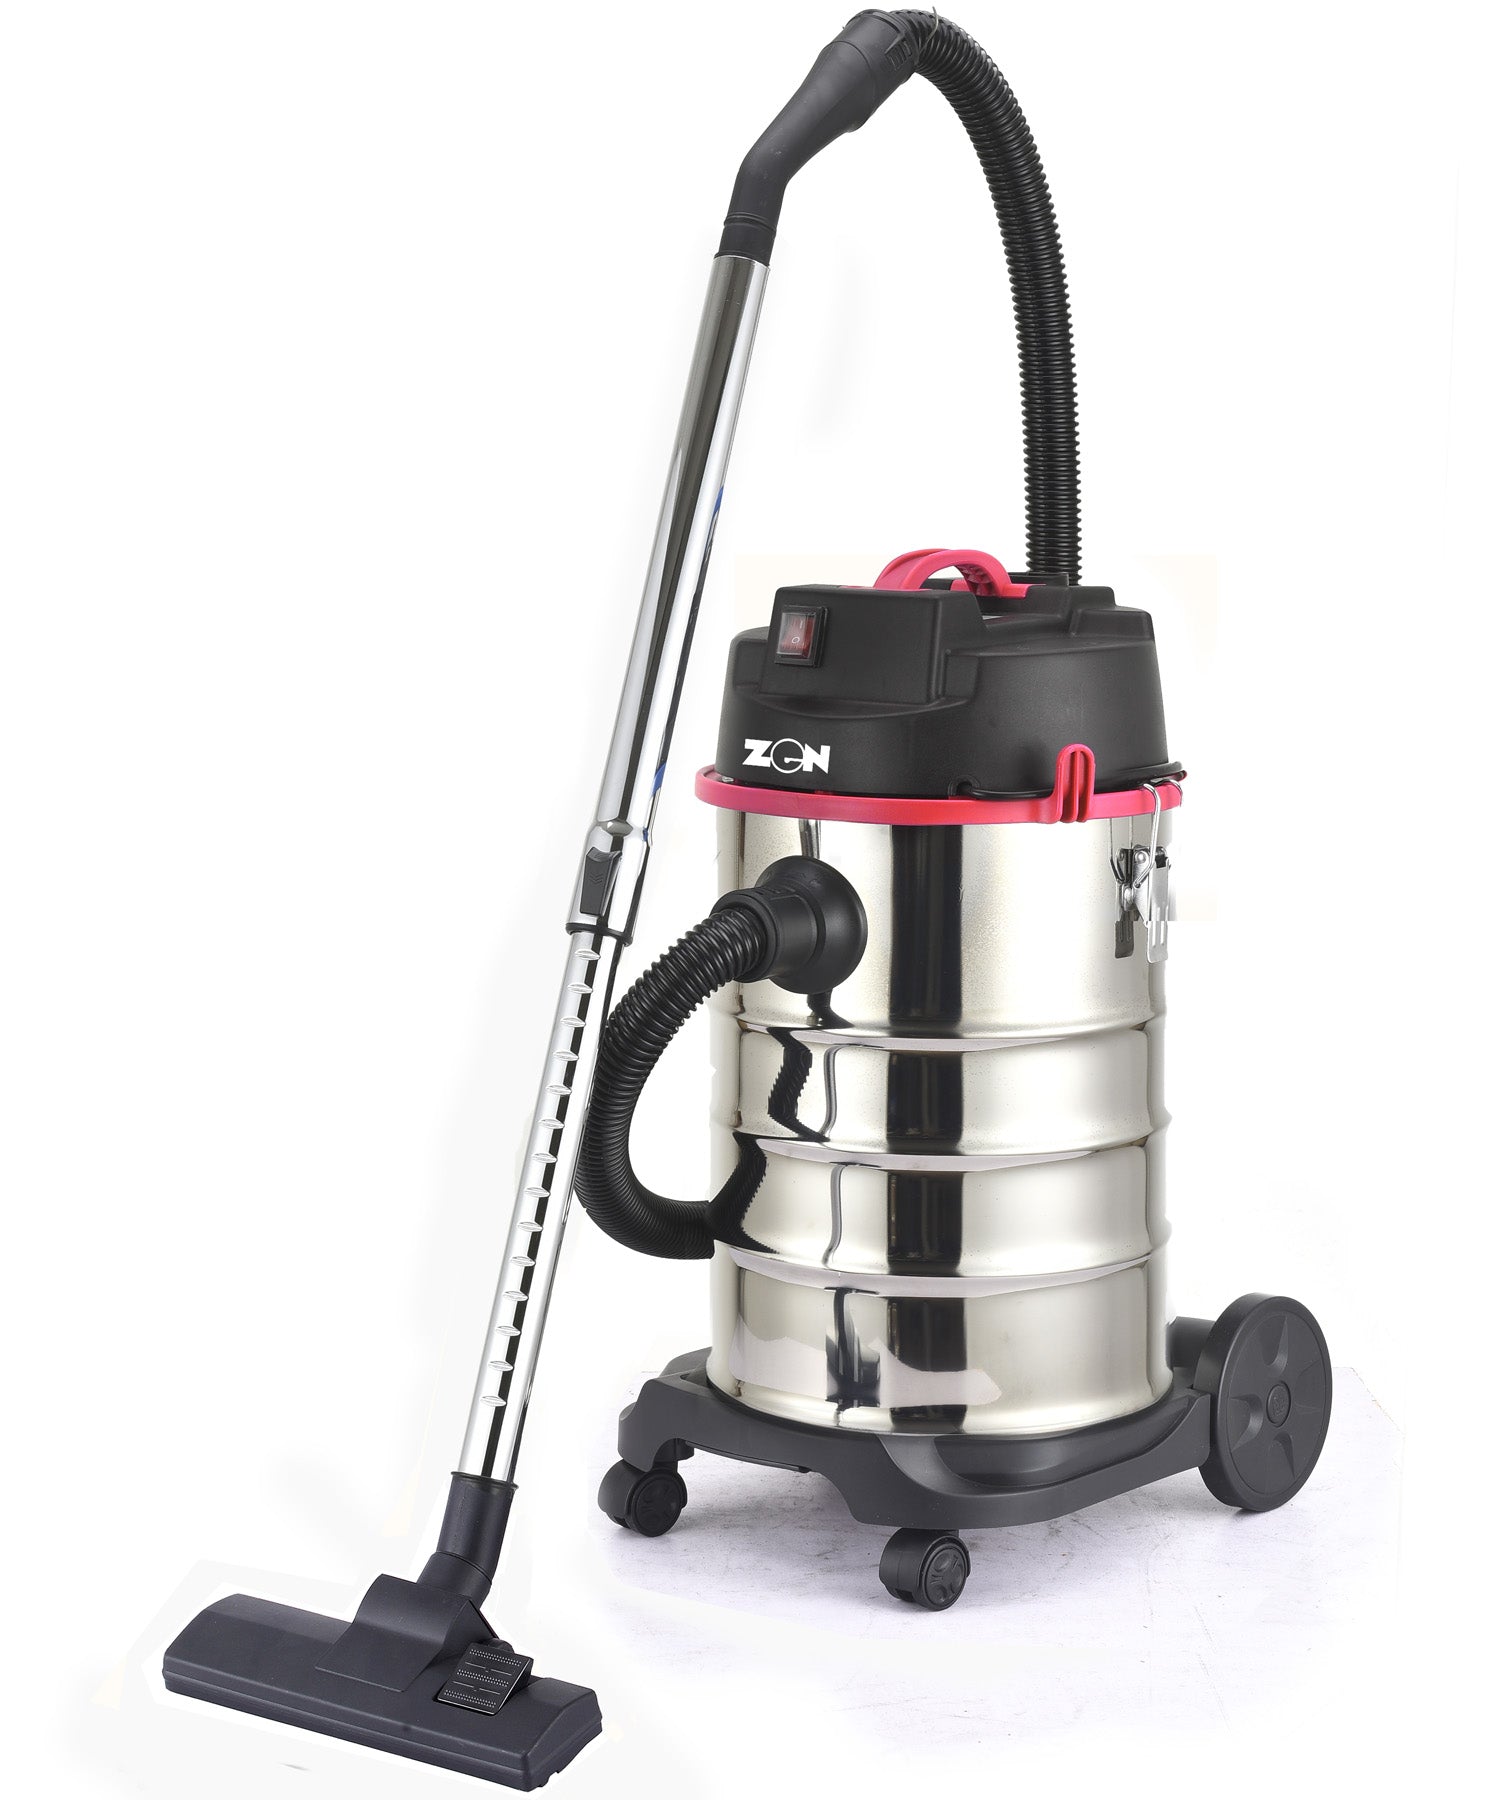 Zen Wet & Dry Vacuum Cleaner with Blower,25L 2000W , ZVC25WD